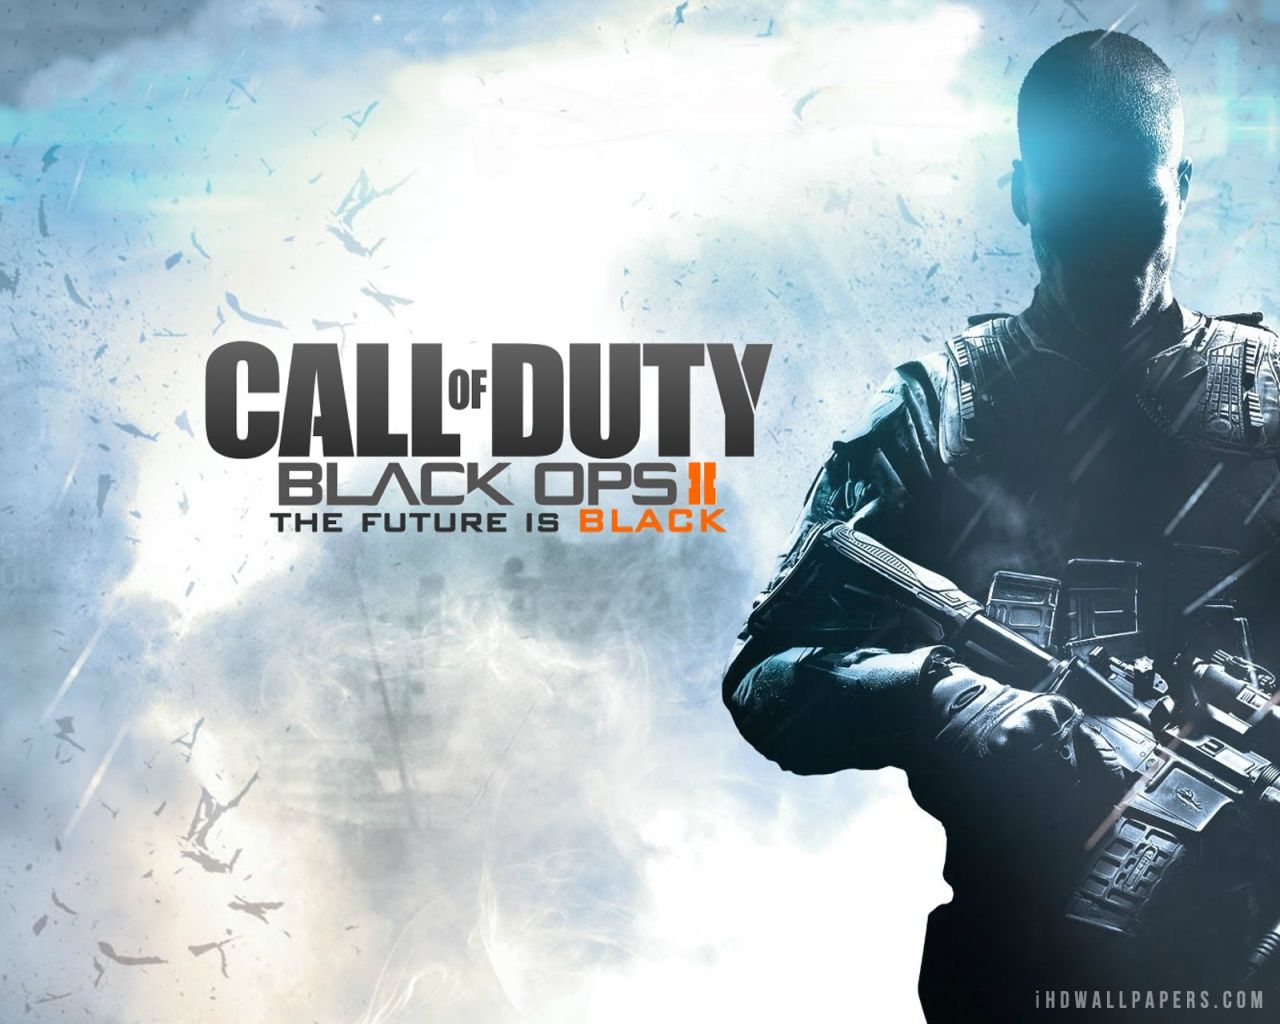 Call of Duty Black Ops 2 Game HD Wallpaper - iHD Wallpapers